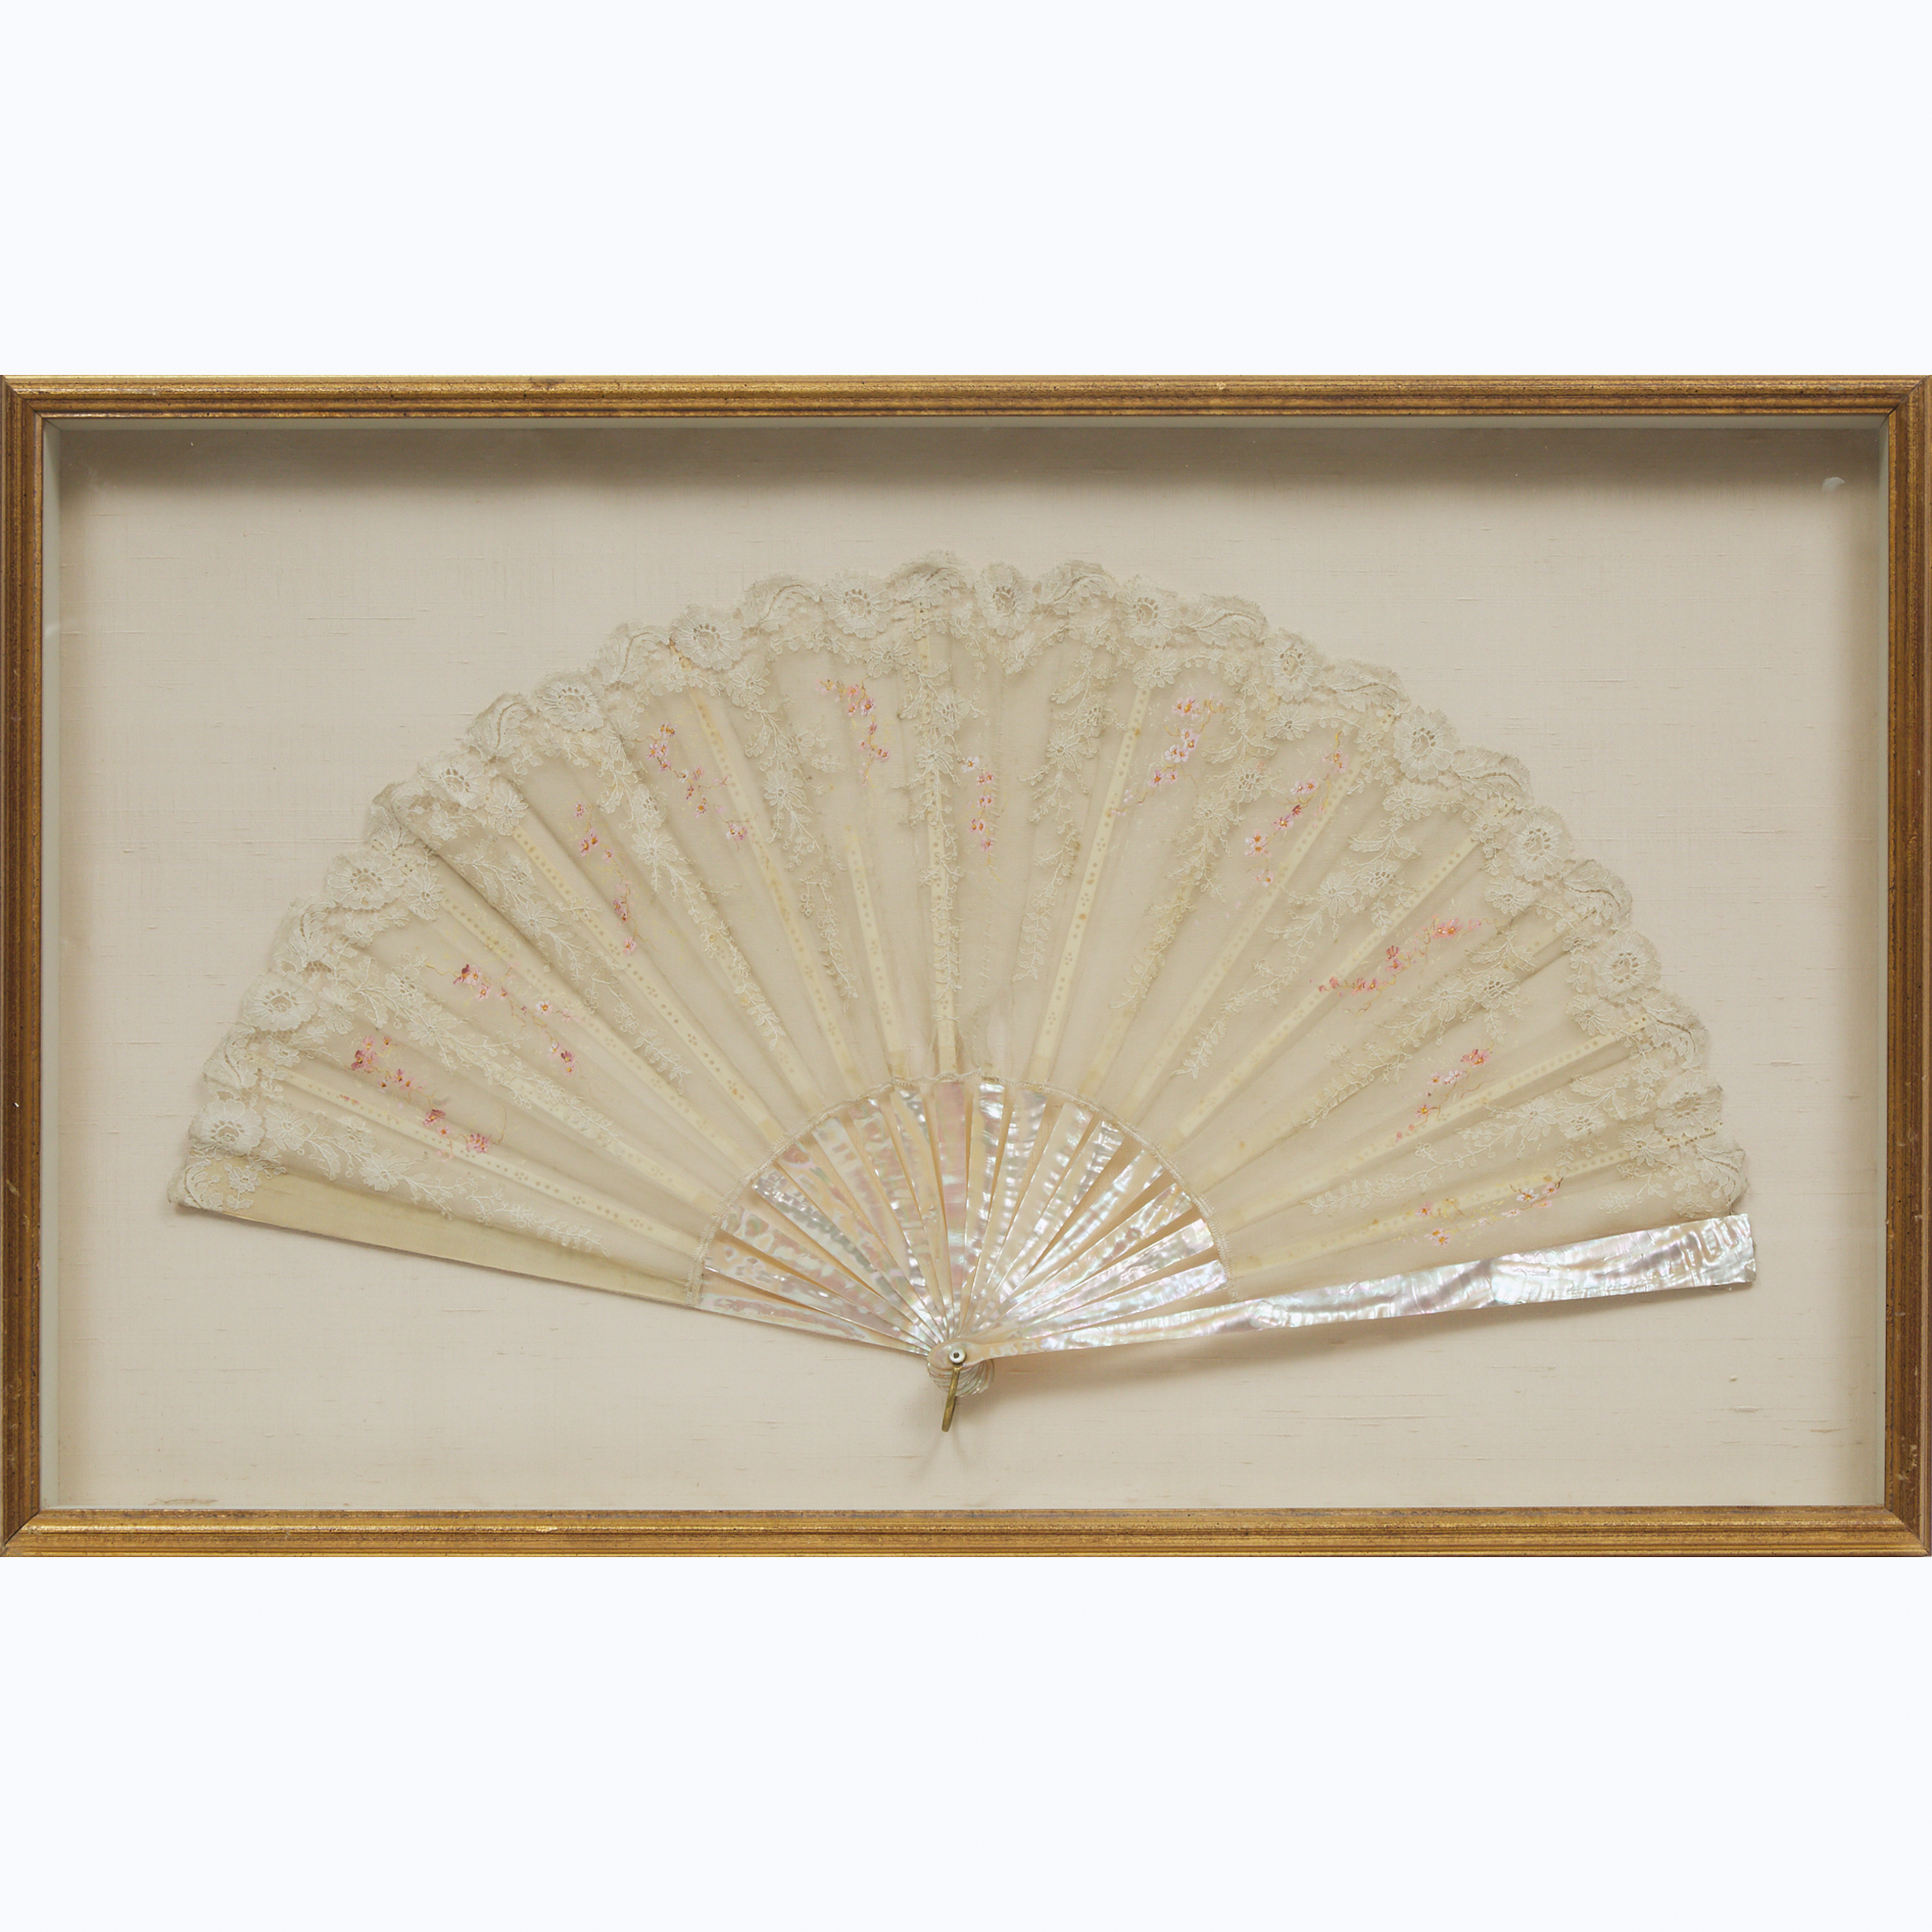 Frame Cased Large French Painted Lace Fan, late 19th/early 20th century